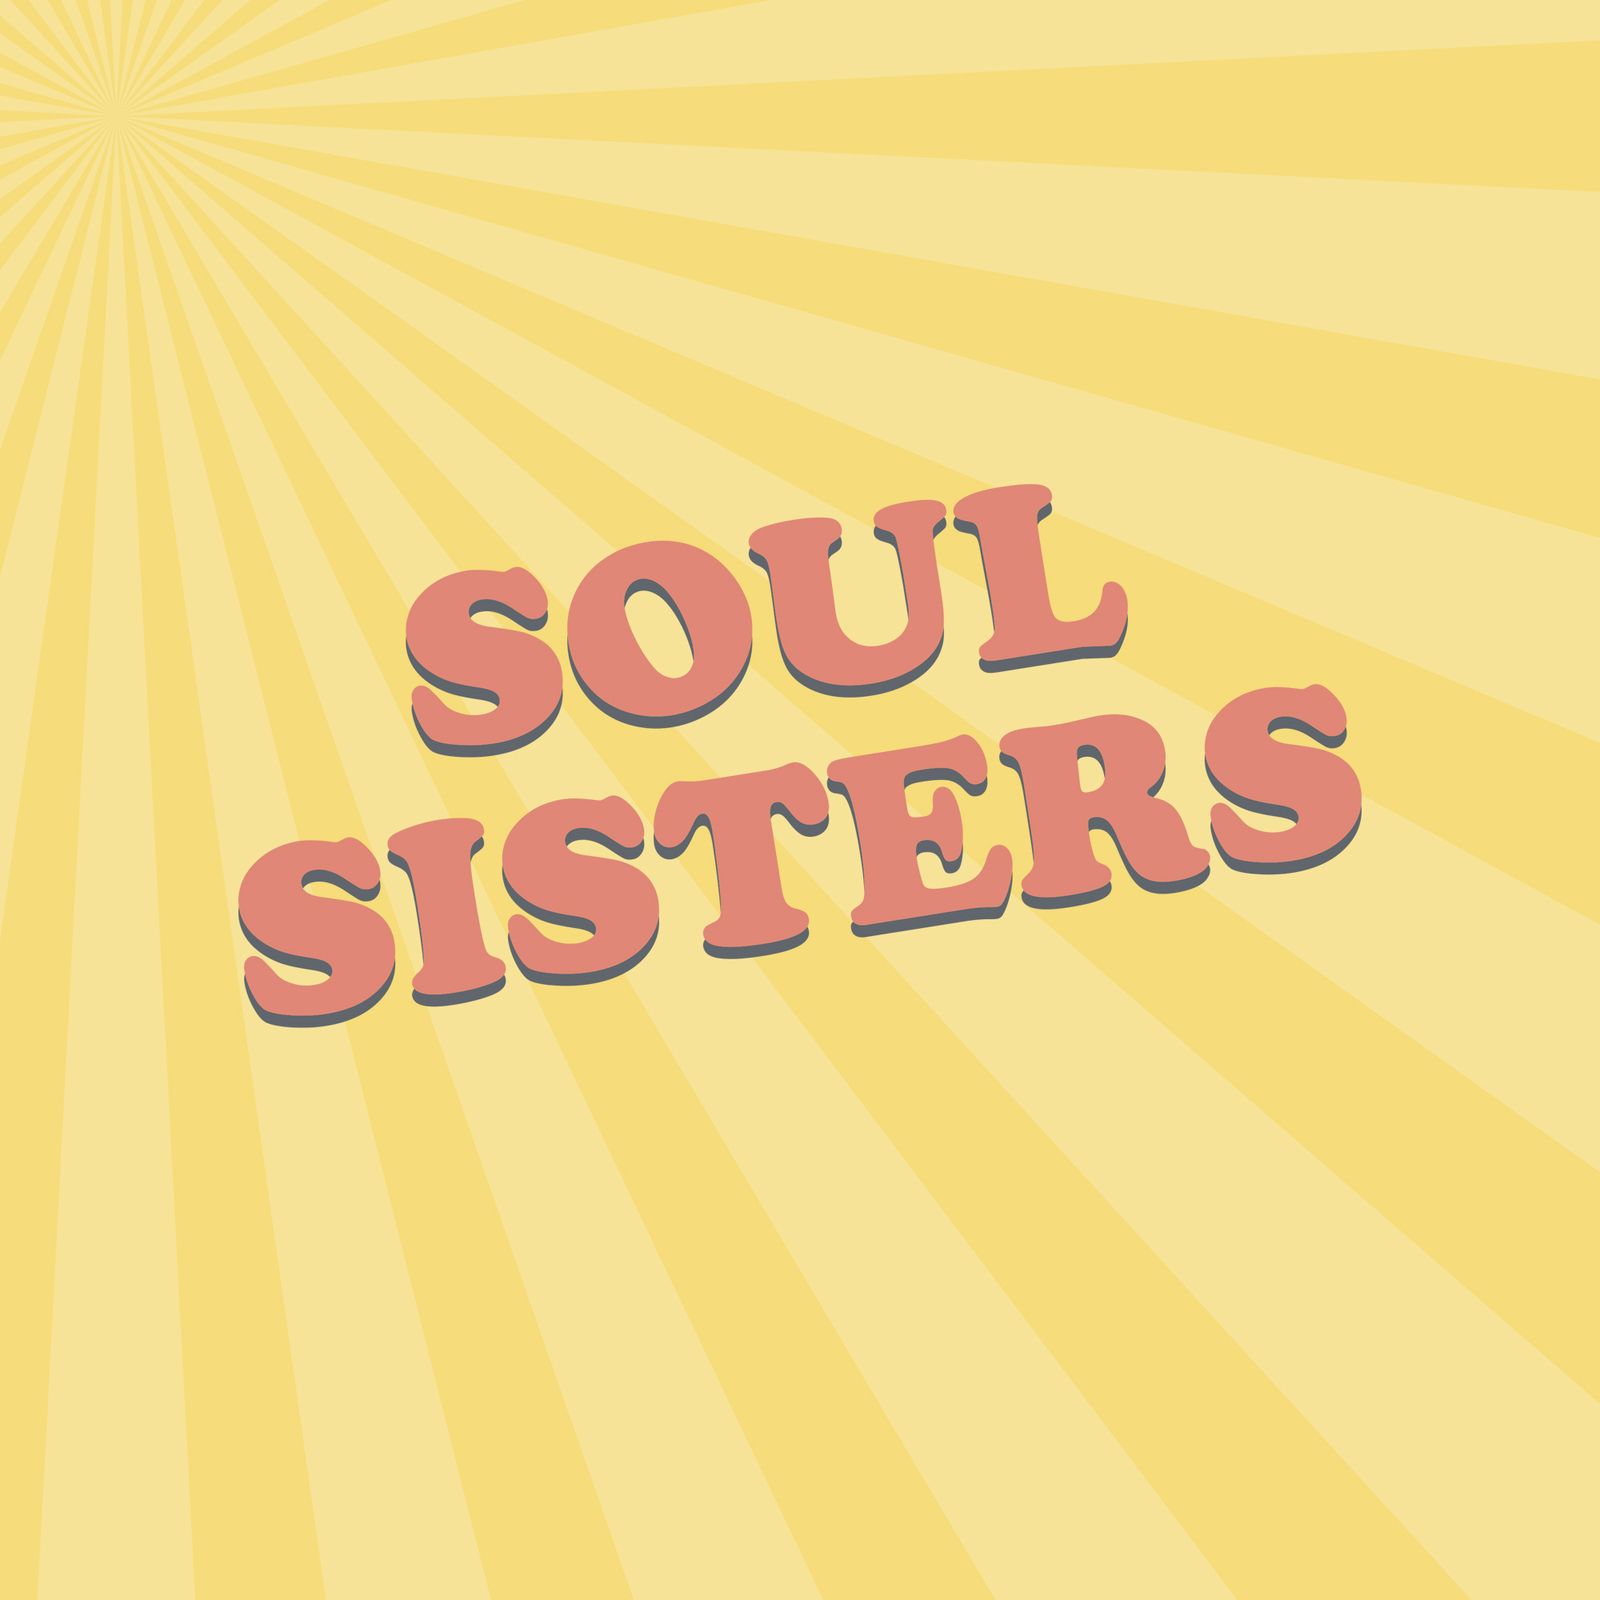 S14 Ep16: Soul Sisters - On A Bus With My Guru From India